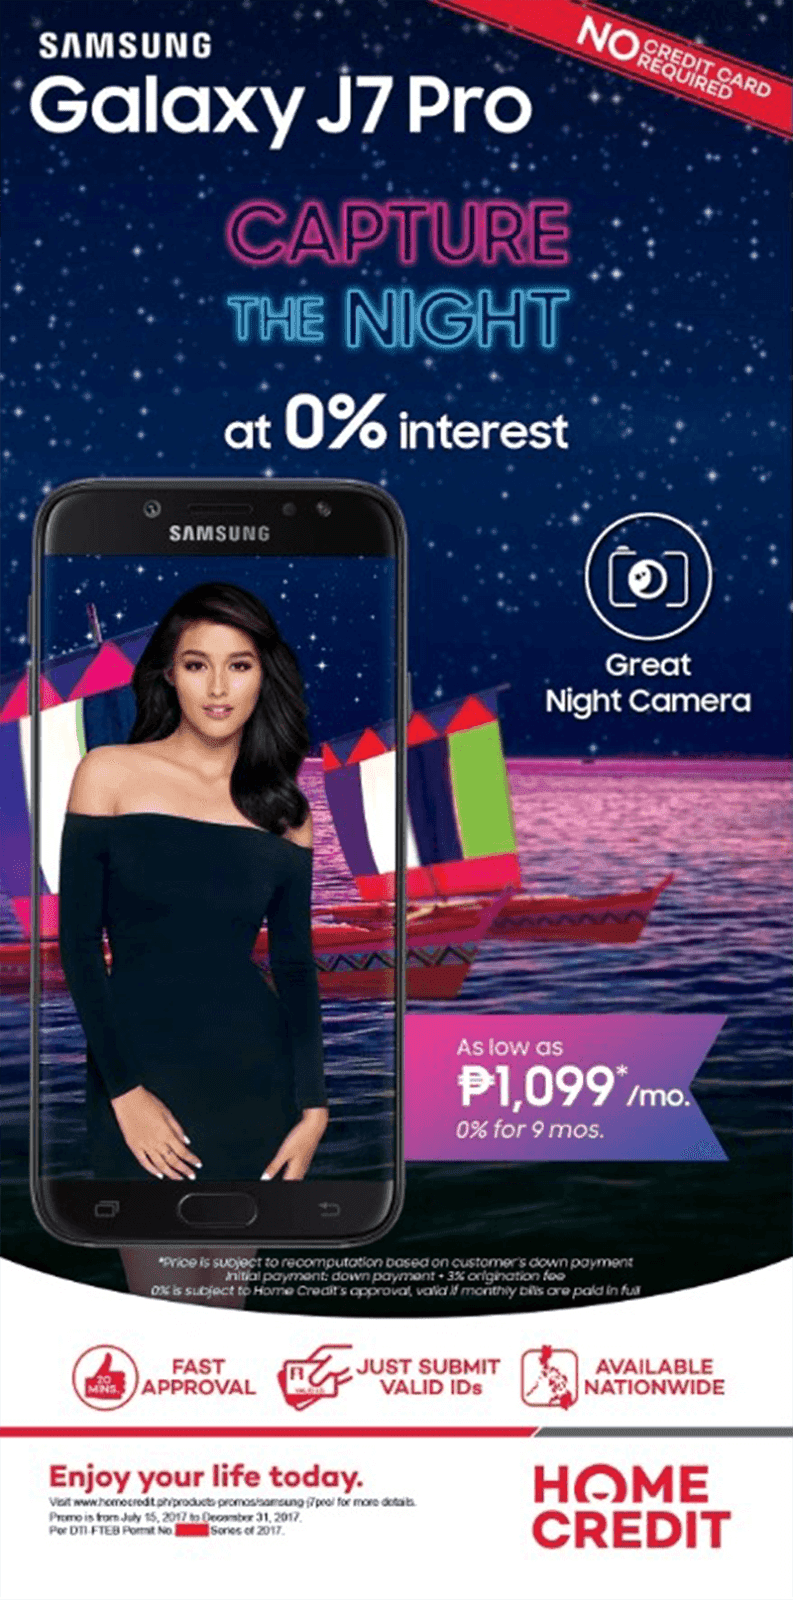 Samsung Galaxy J7 Pro Will Be Available At Home Credit's 0% Program